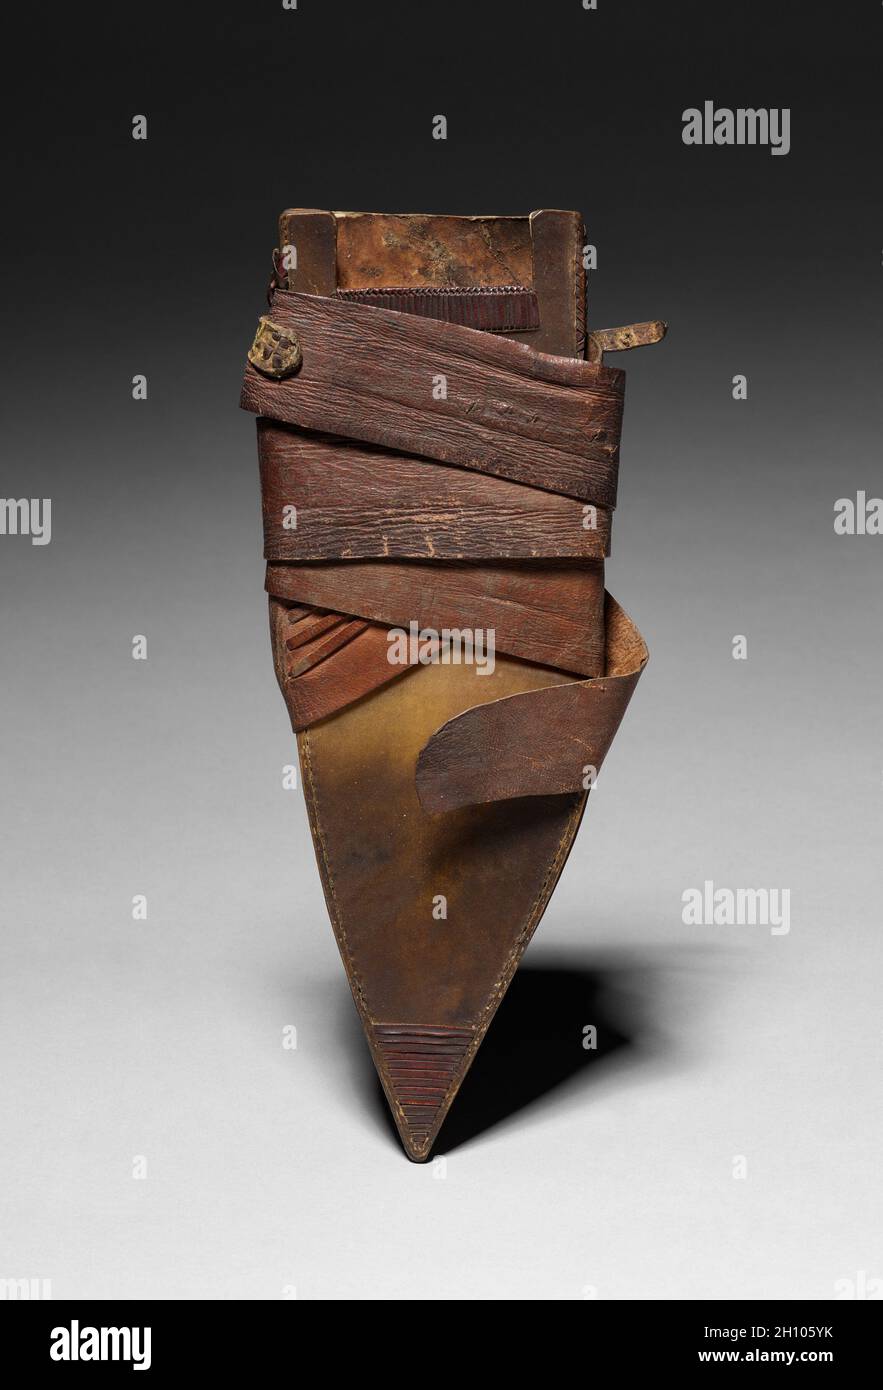 Sheath, 1800s. Africa, 19th century. Leather or rawhide; blade: 23.5 cm (9 1/4 in.); scabbard: 10.2 cm (4 in.); knife including handle: 40.7 cm (16 in.). Stock Photo